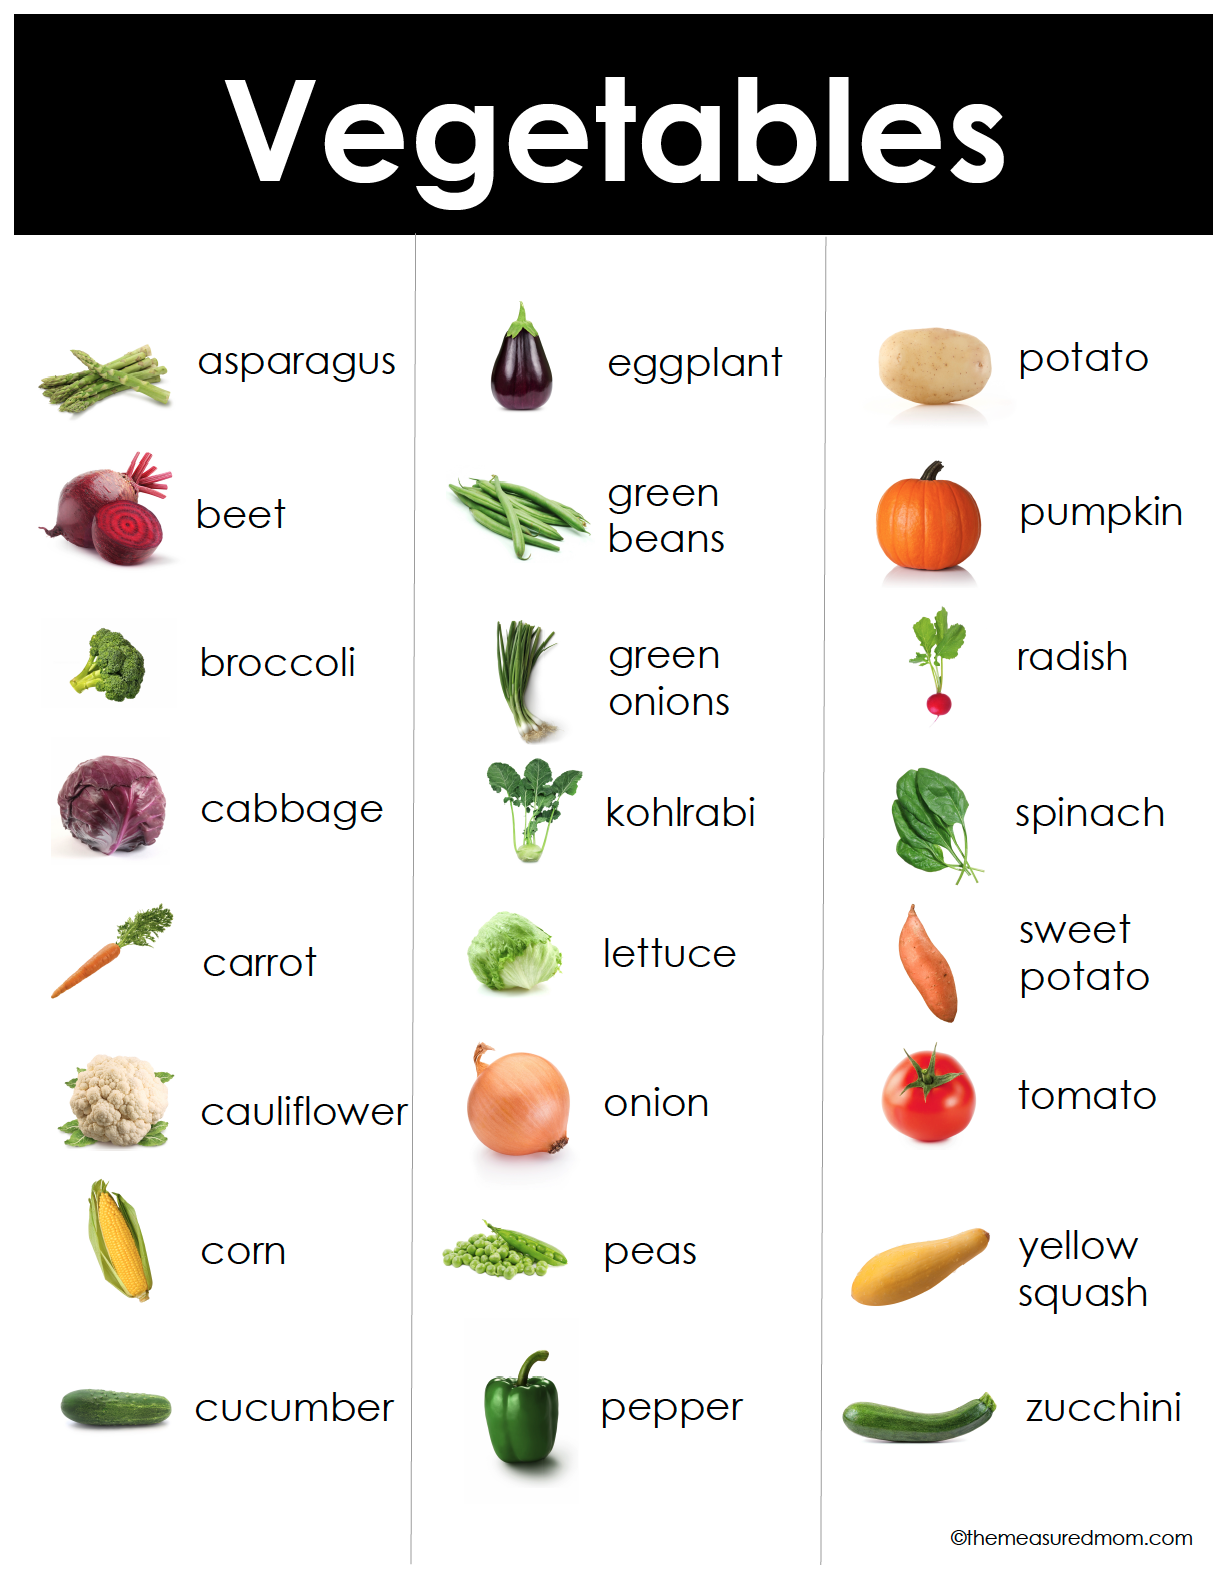 From Asparagus to Zucchini: English Words for Vegetables